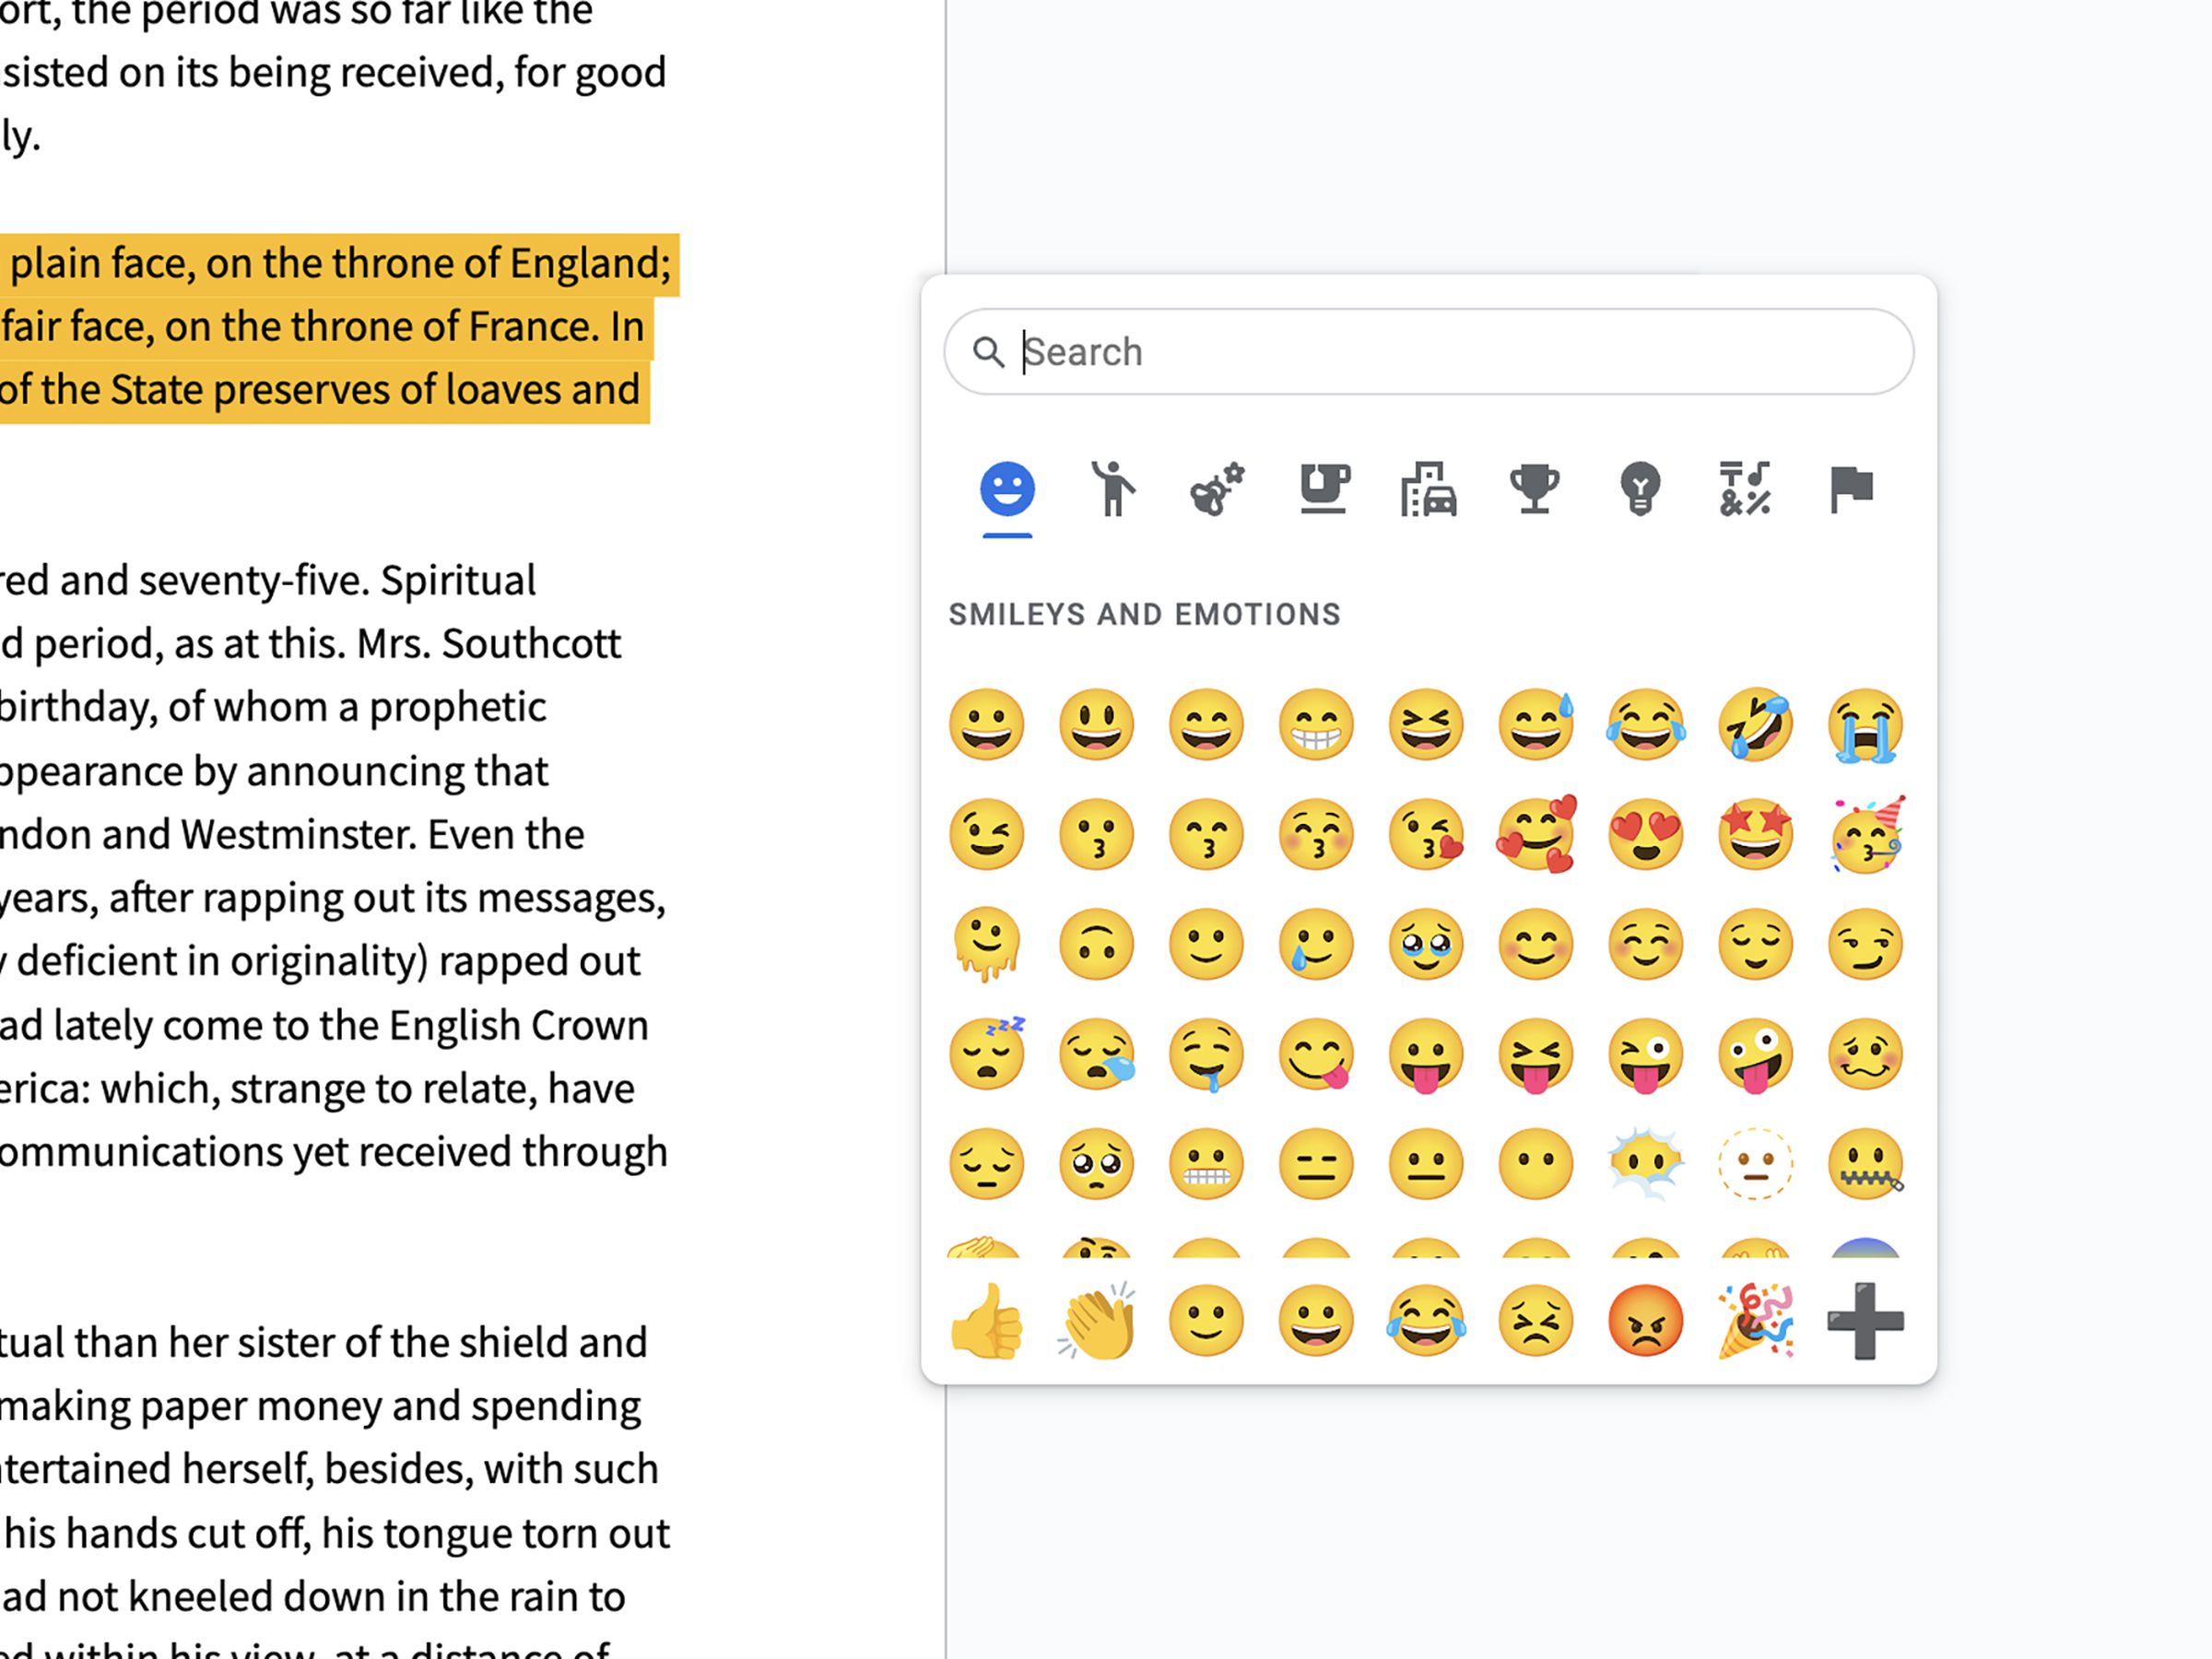 text on left, a box of emojis on the right.